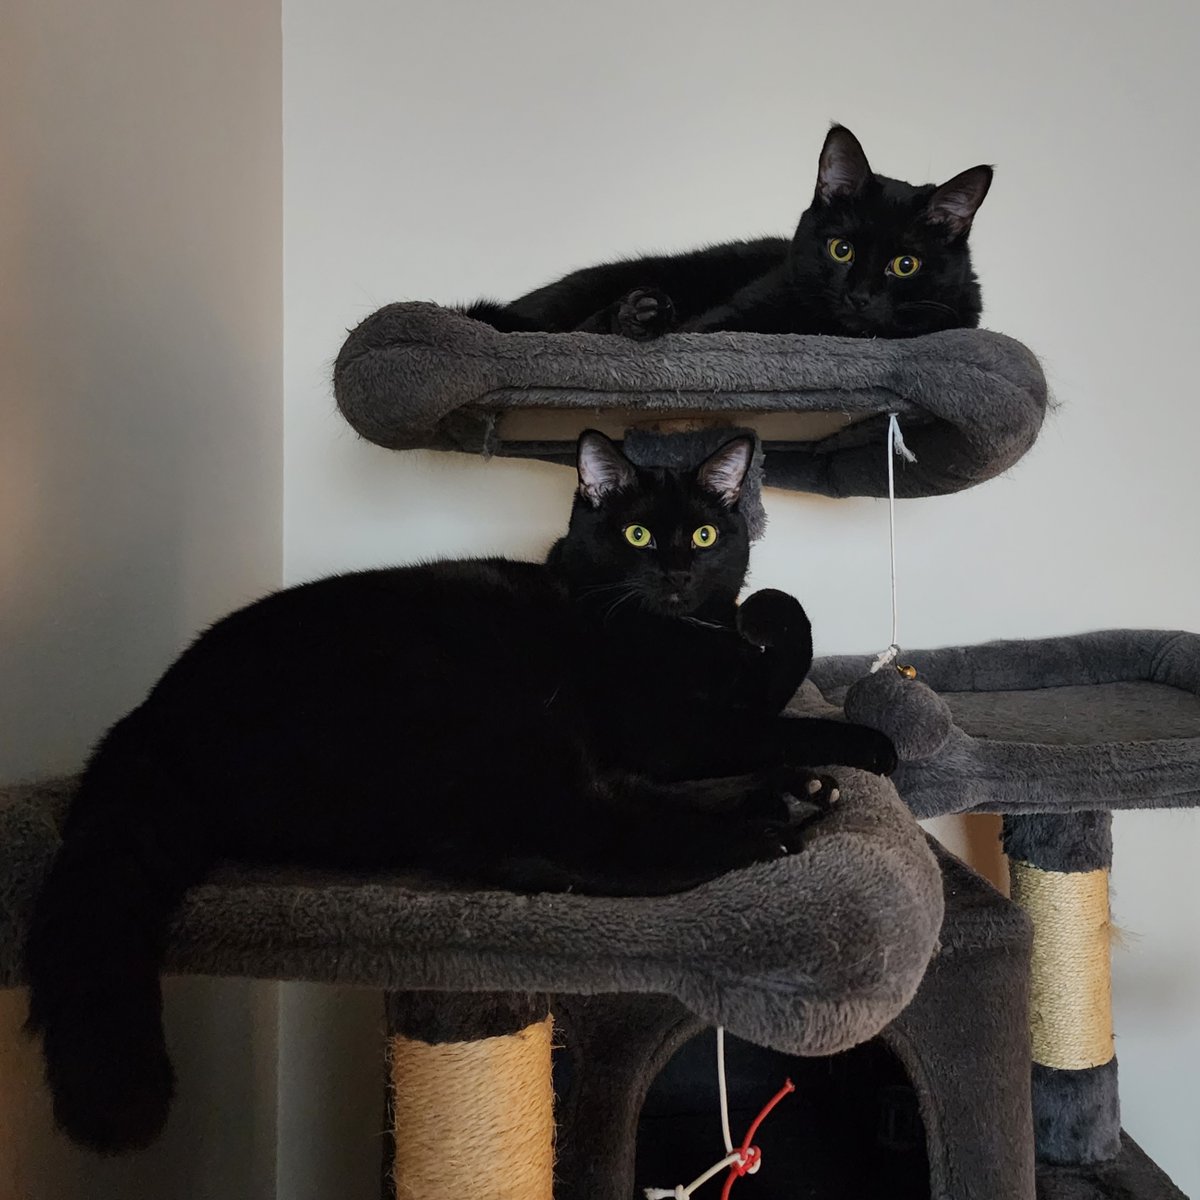 Treats and new toys today, for these two cuties! Partly because their little brother has destroyed most of them, buuut lol... Happy Gotcha Day Lilith and Lucifer! 💚
#adoptdontshop #blackcats #blackcatsofinstagram #cats #catsofinstagram #housepanthers  #lilith #lucifer